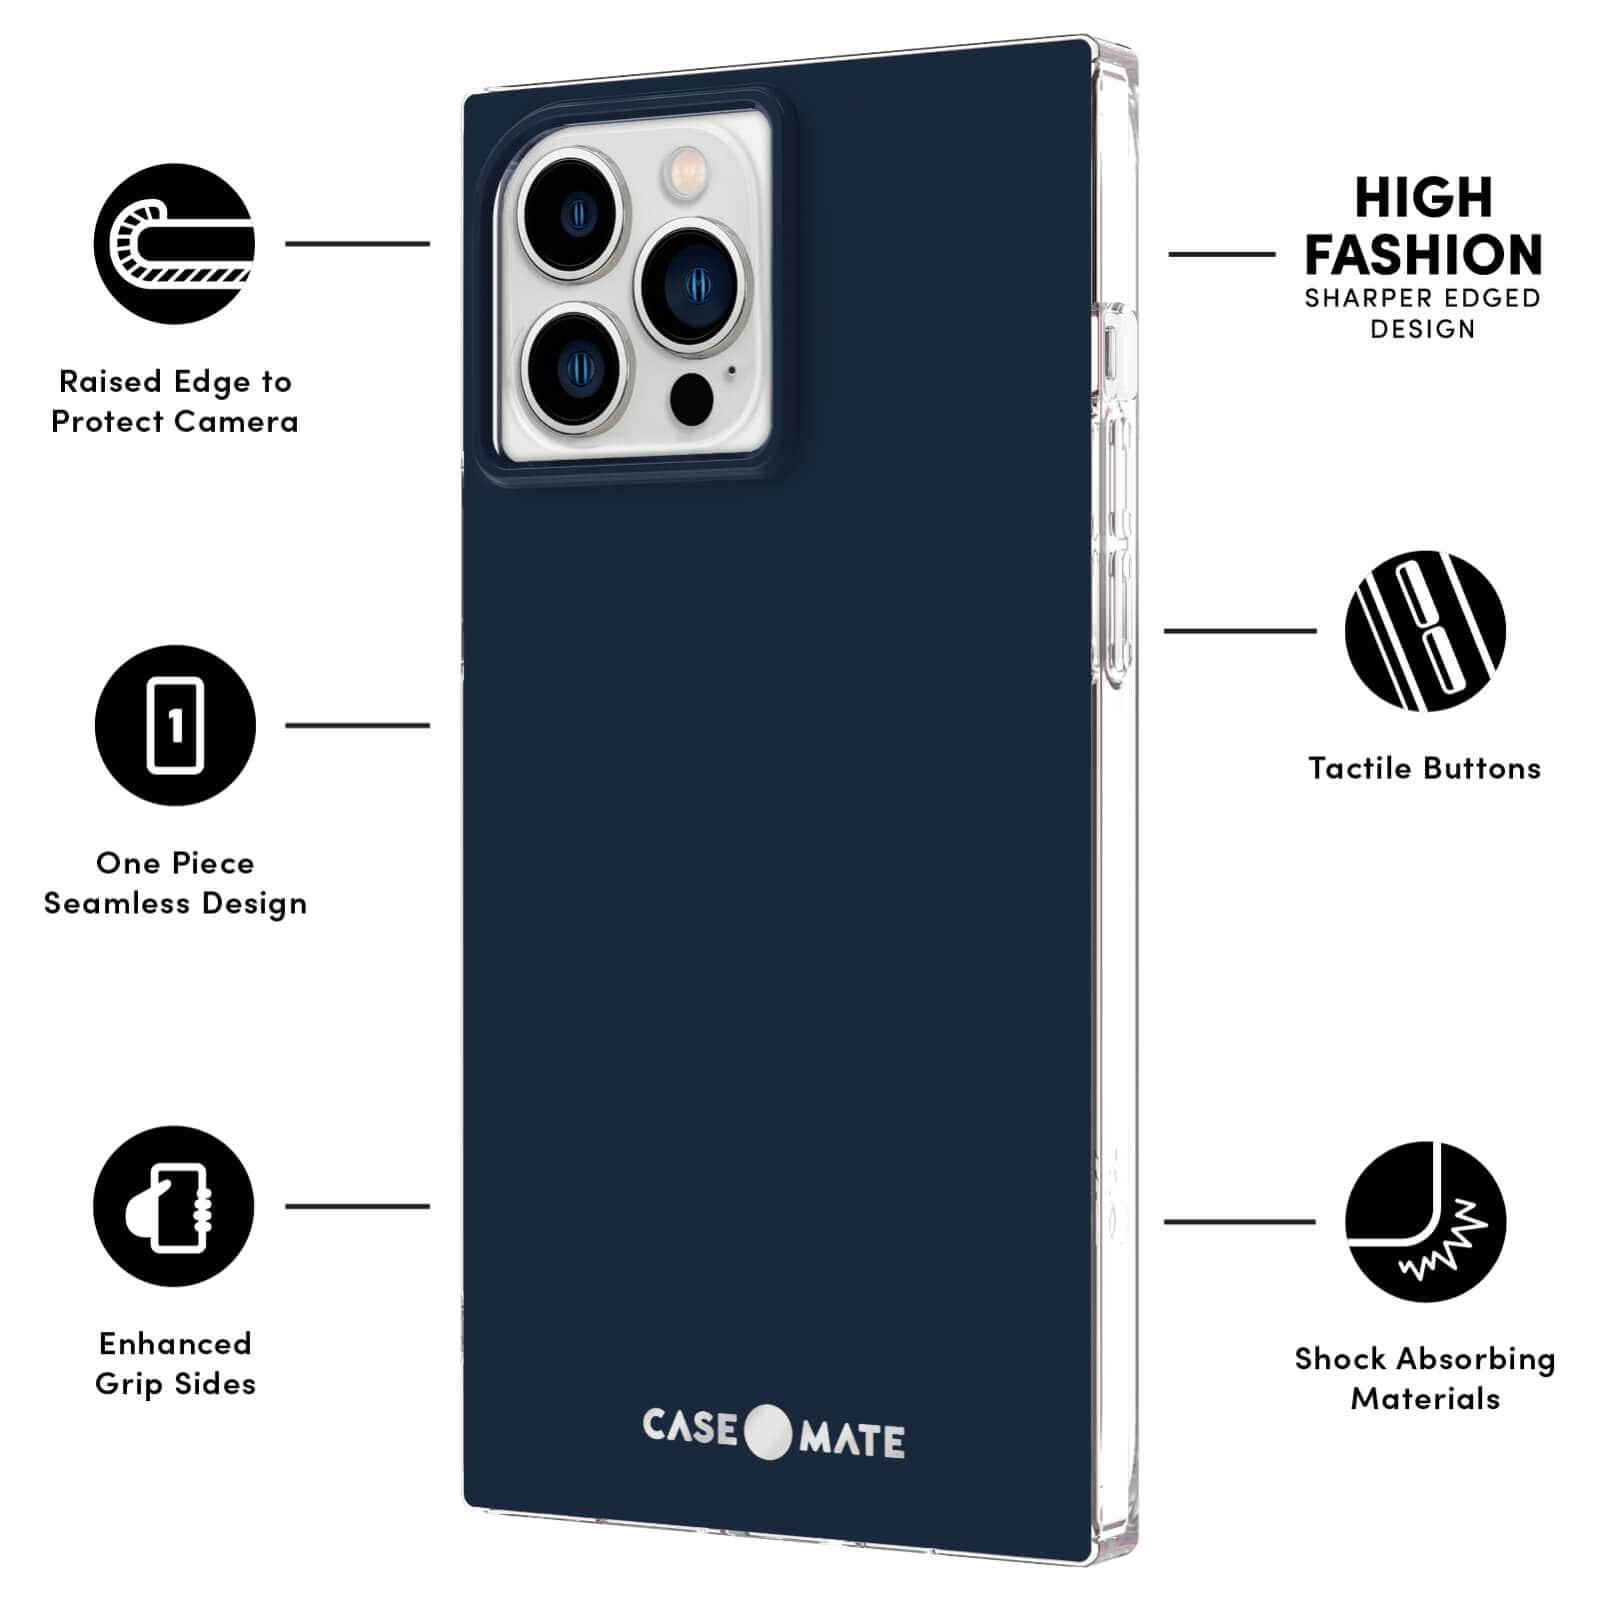 FEATURES: RAISED EDGE TO PROTECT CAMERA, ONE PIECE SEAMLESS DESIGN, ENHANCED GRIP SIDES, HIGH FASHION SHARPR EDGED DESIGN, TACTILE BUTTONS, SHOCK ABSORBING MATERIALS. COLOR::NAVY